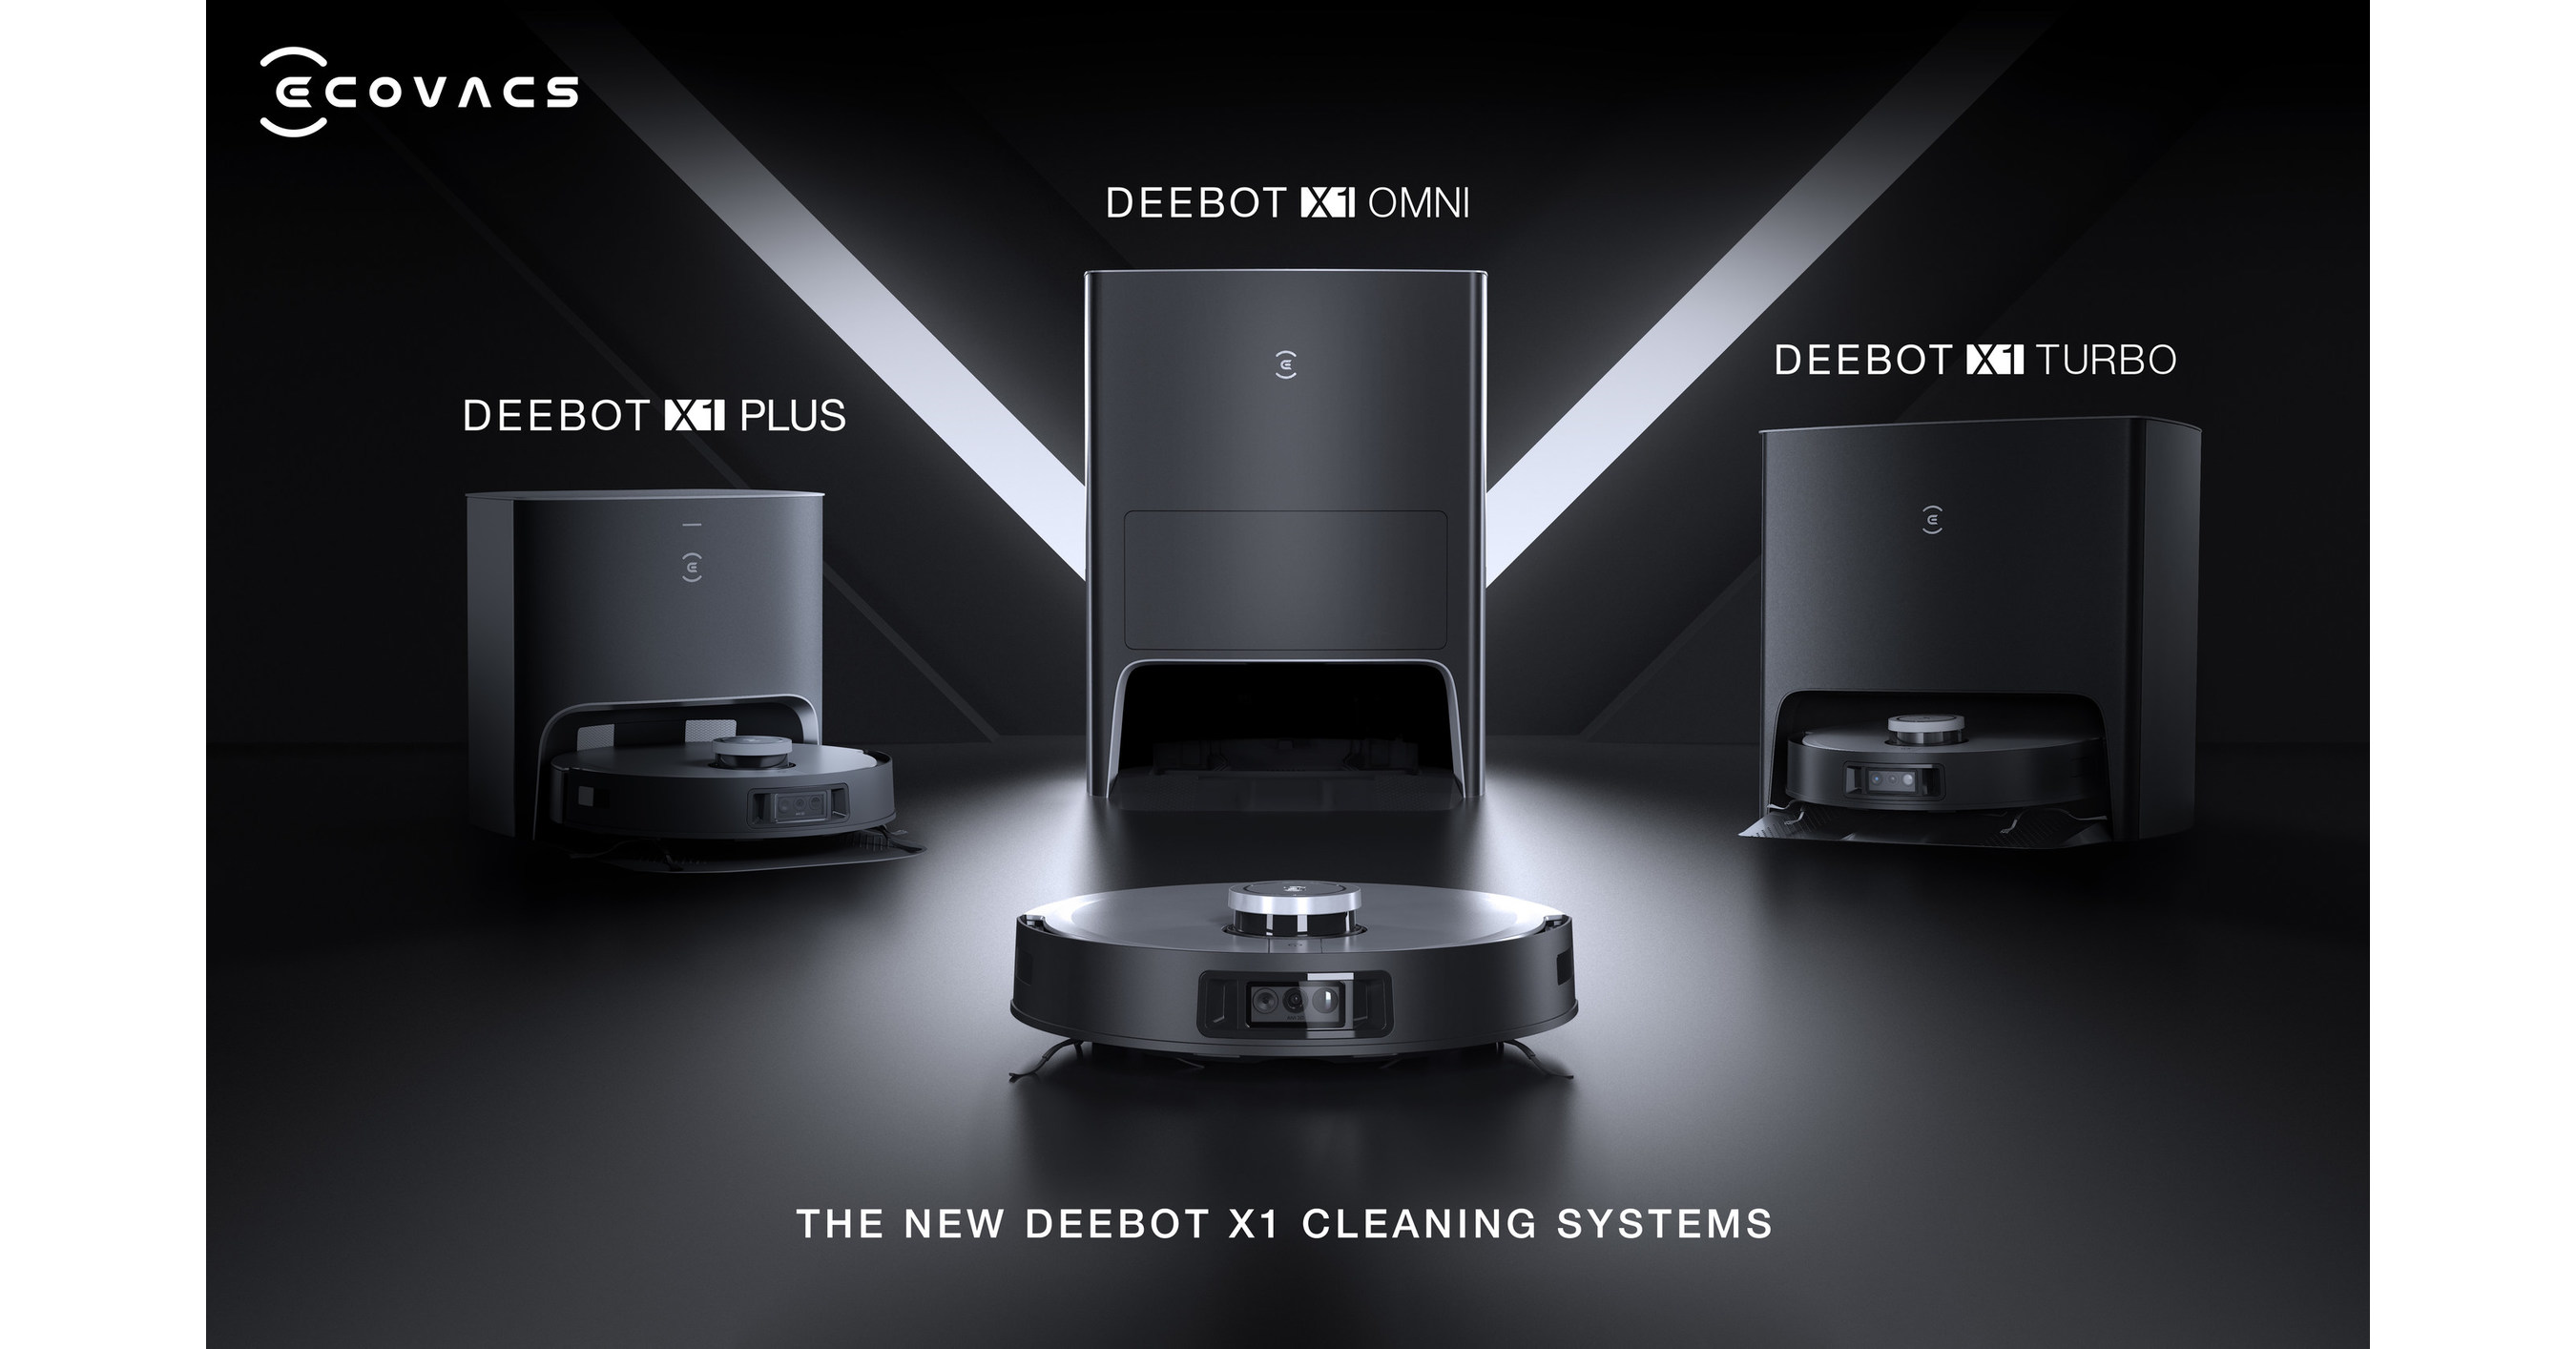 WELCOME TO THE HANDS-FREE FUTURE: ECOVACS' NEW FLAGSHIP PRODUCT, THE DEEBOT  X1 OMNI, IS NOW AVAILABLE FOR PURCHASE